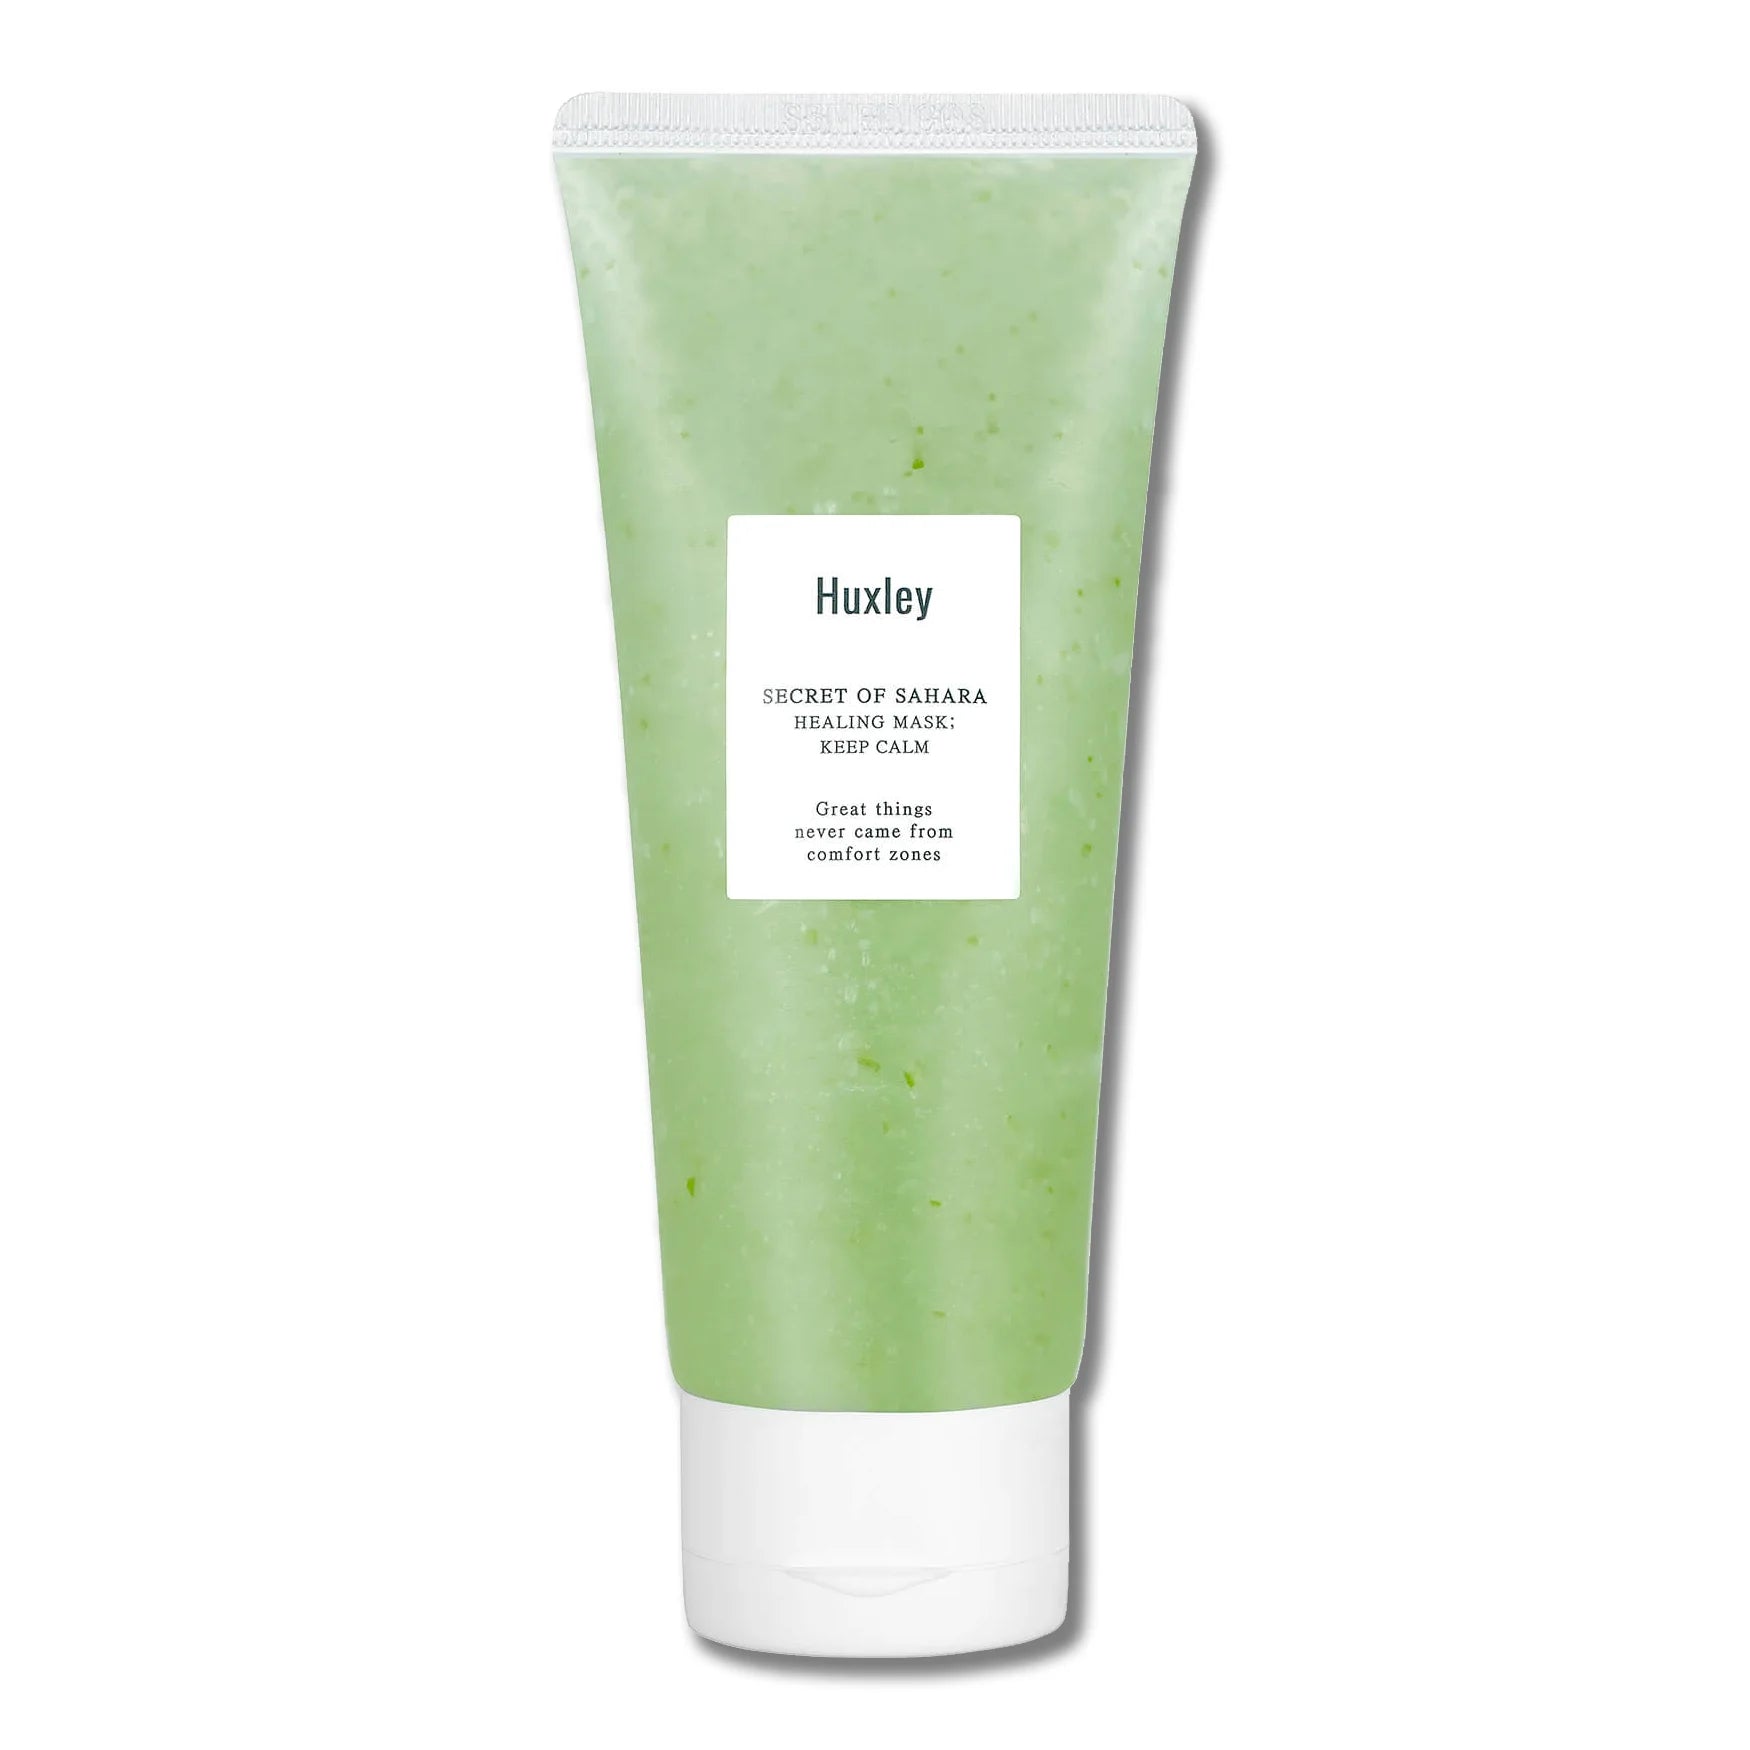 Huxley Keep Calm Healing Mask face care at home luxury gift for girl friends mom Korean cosmetics K Beauty World